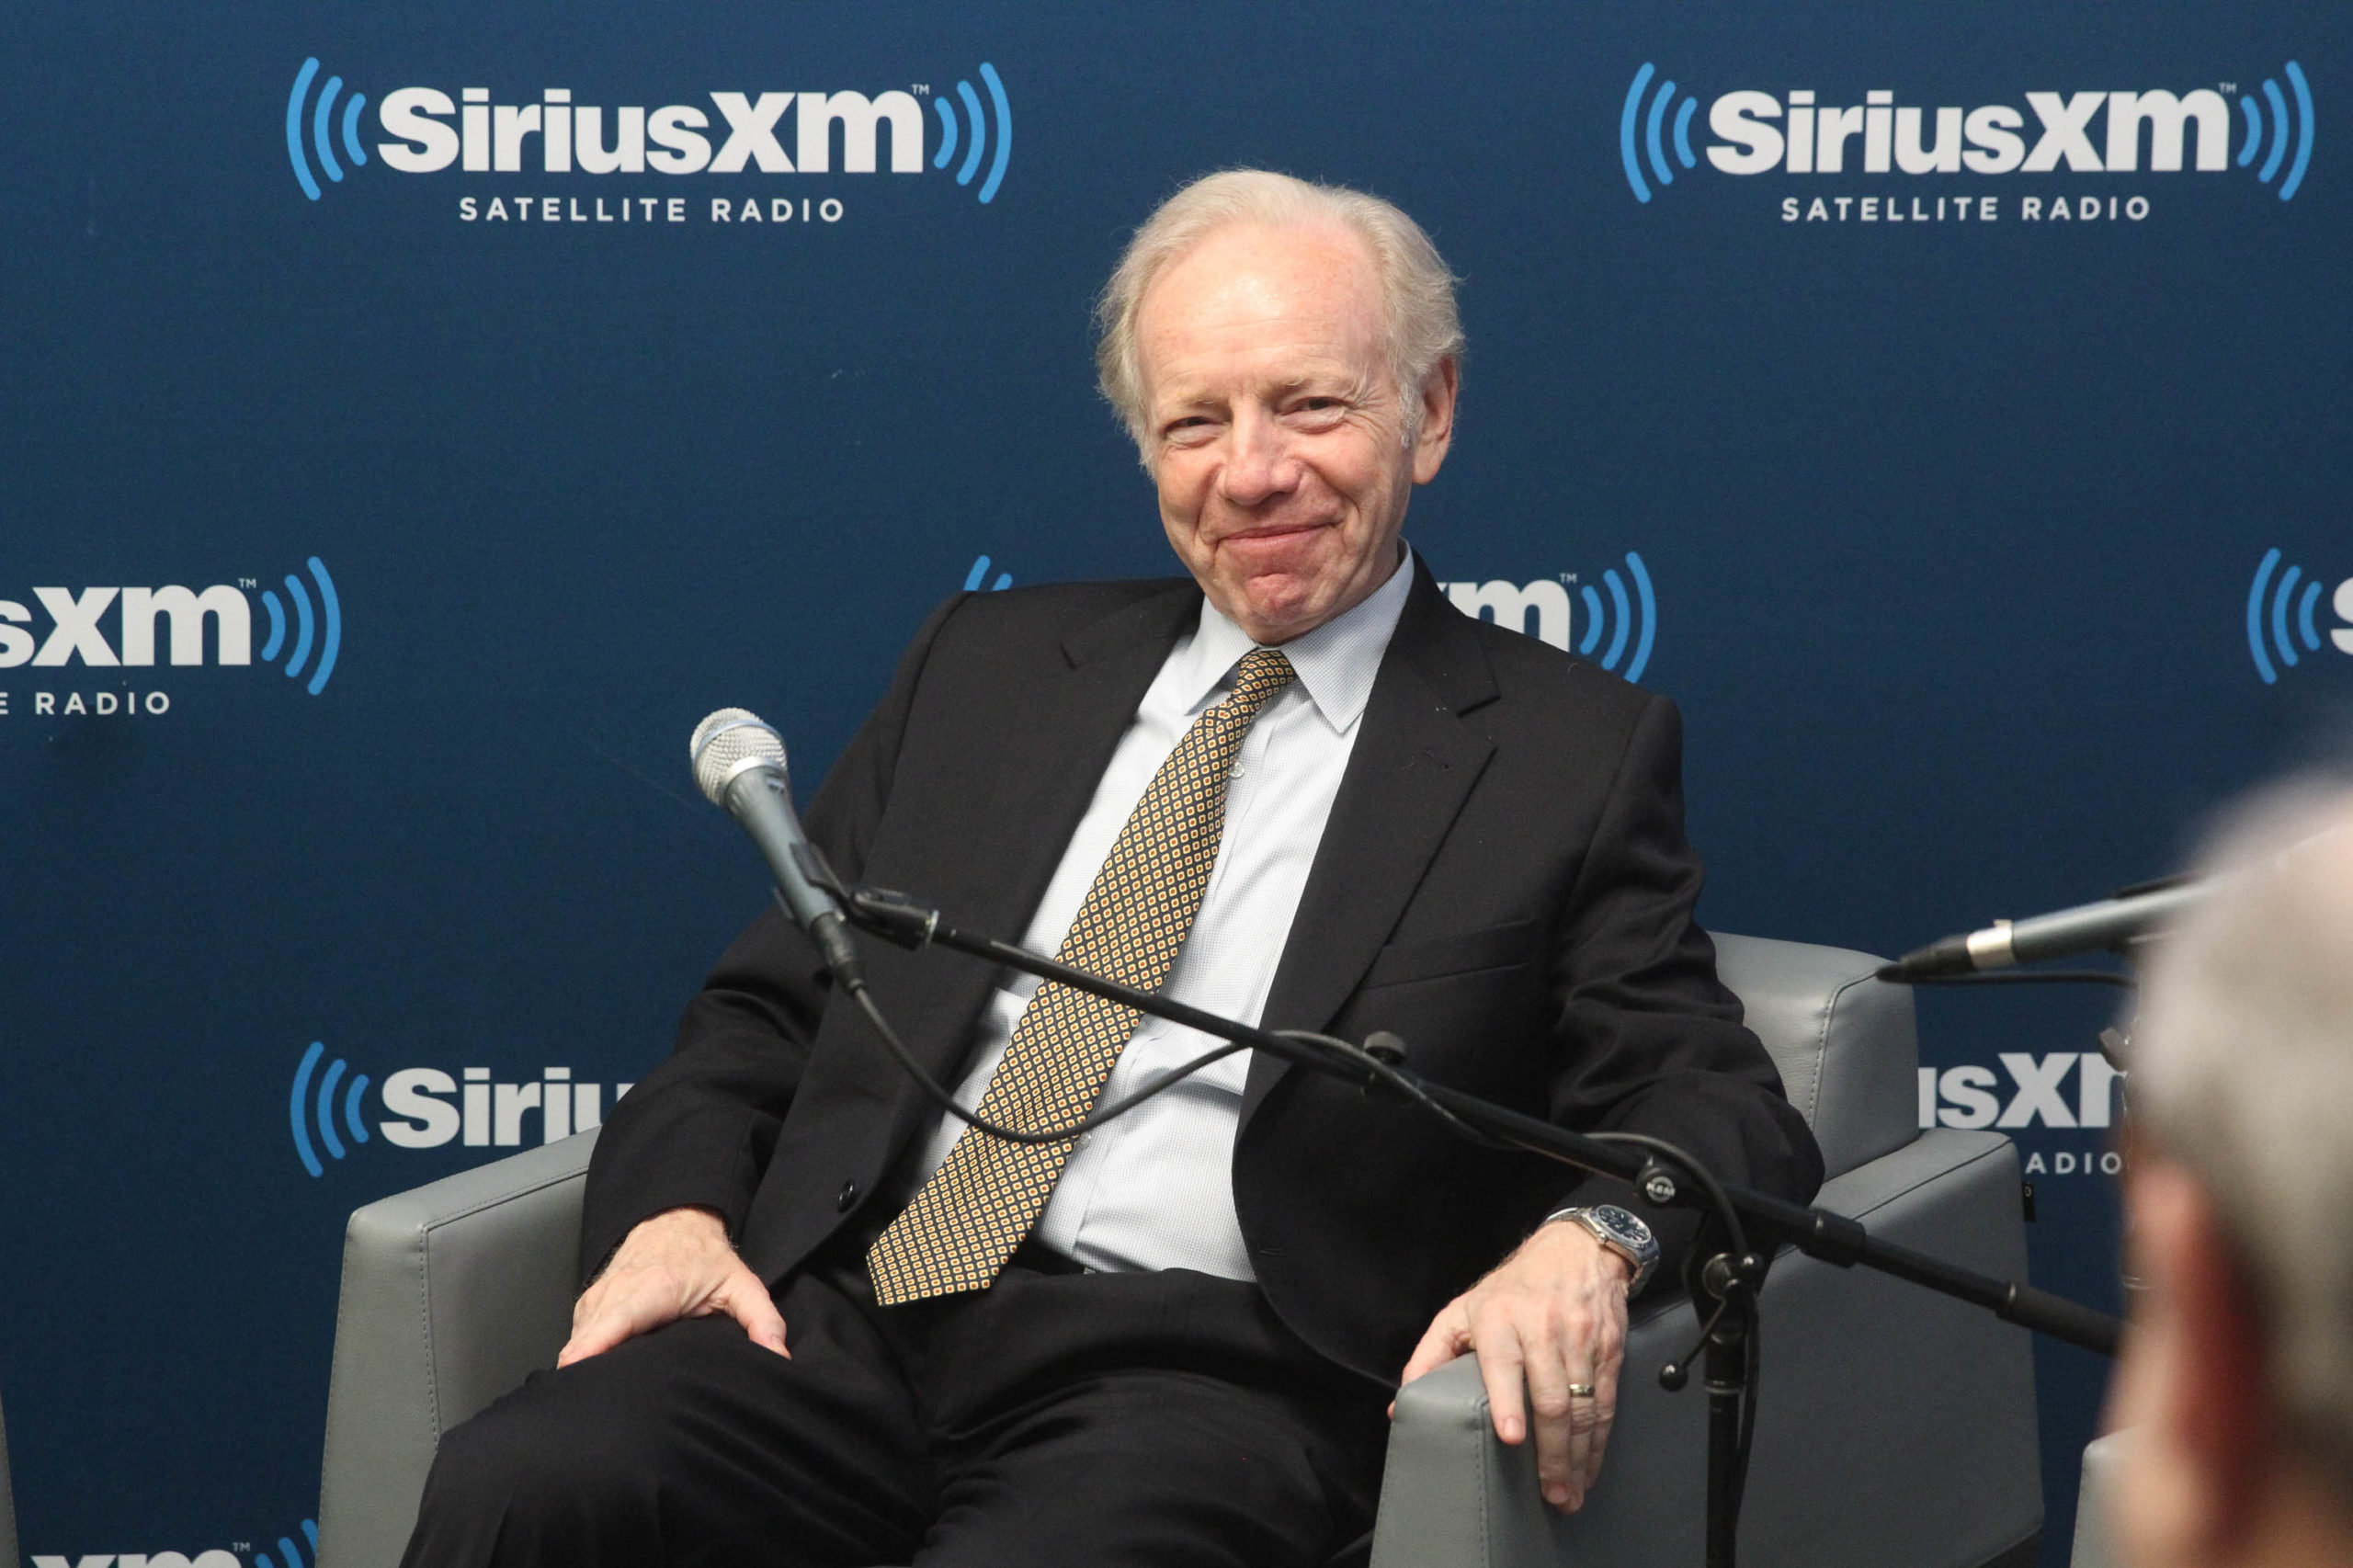 NEW YORK, NY - MAY 05: No Labels Co-Chair Joe Lieberman (I-CT) co-hosts a special edition of SiriusXM's No Labels Radio, airing on SiriusXM POTUS at SiriusXM Studios on May 5, 2015 in New York City. (Photo by Rob Kim/Getty Images for SiriusXM)